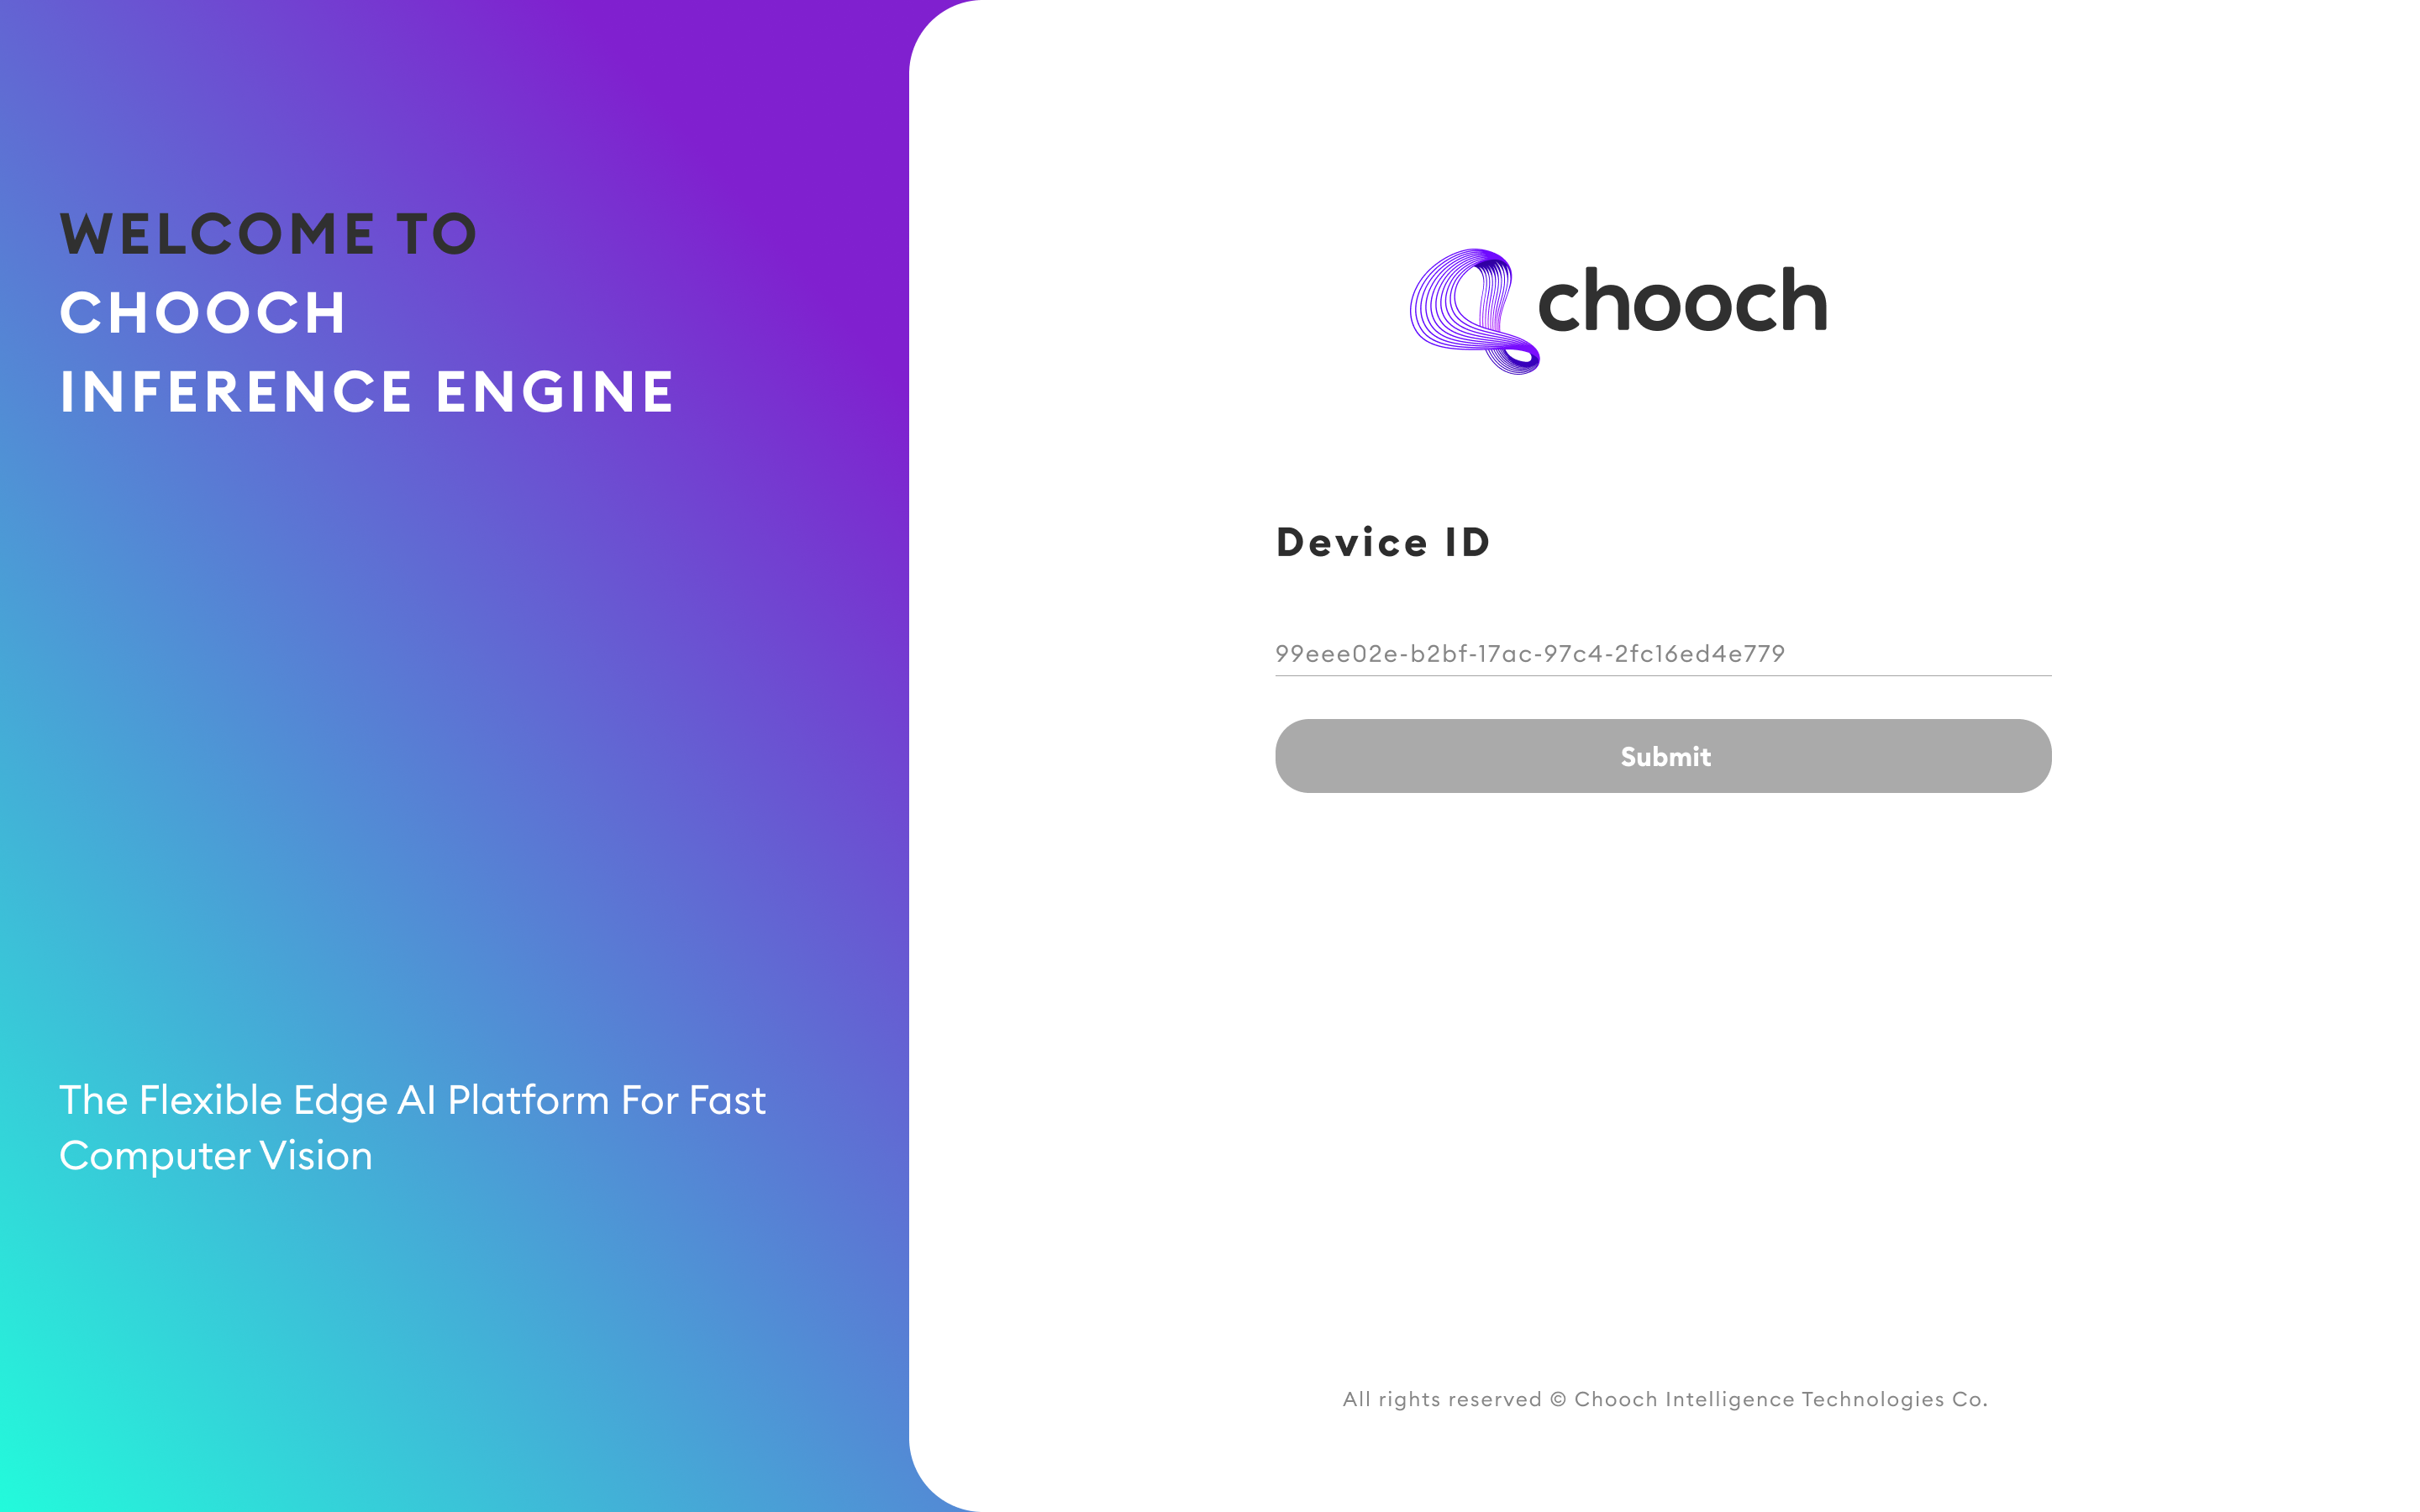 Chooch Inference Engine Control Panel